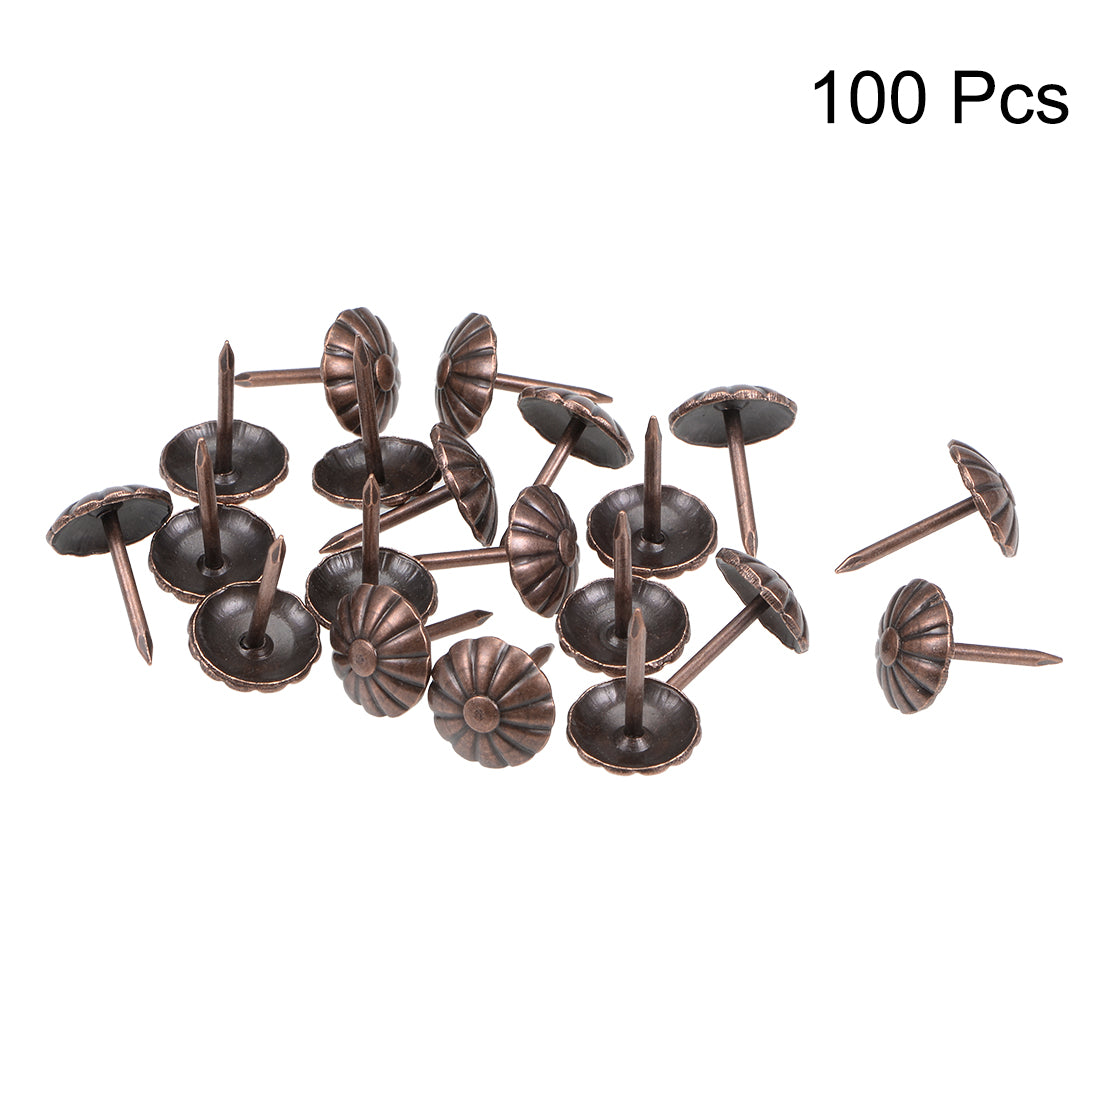 uxcell Uxcell Upholstery Nails Tacks 11mm Dia Round Head Antique Push Pins Copper Tone 100 Pcs